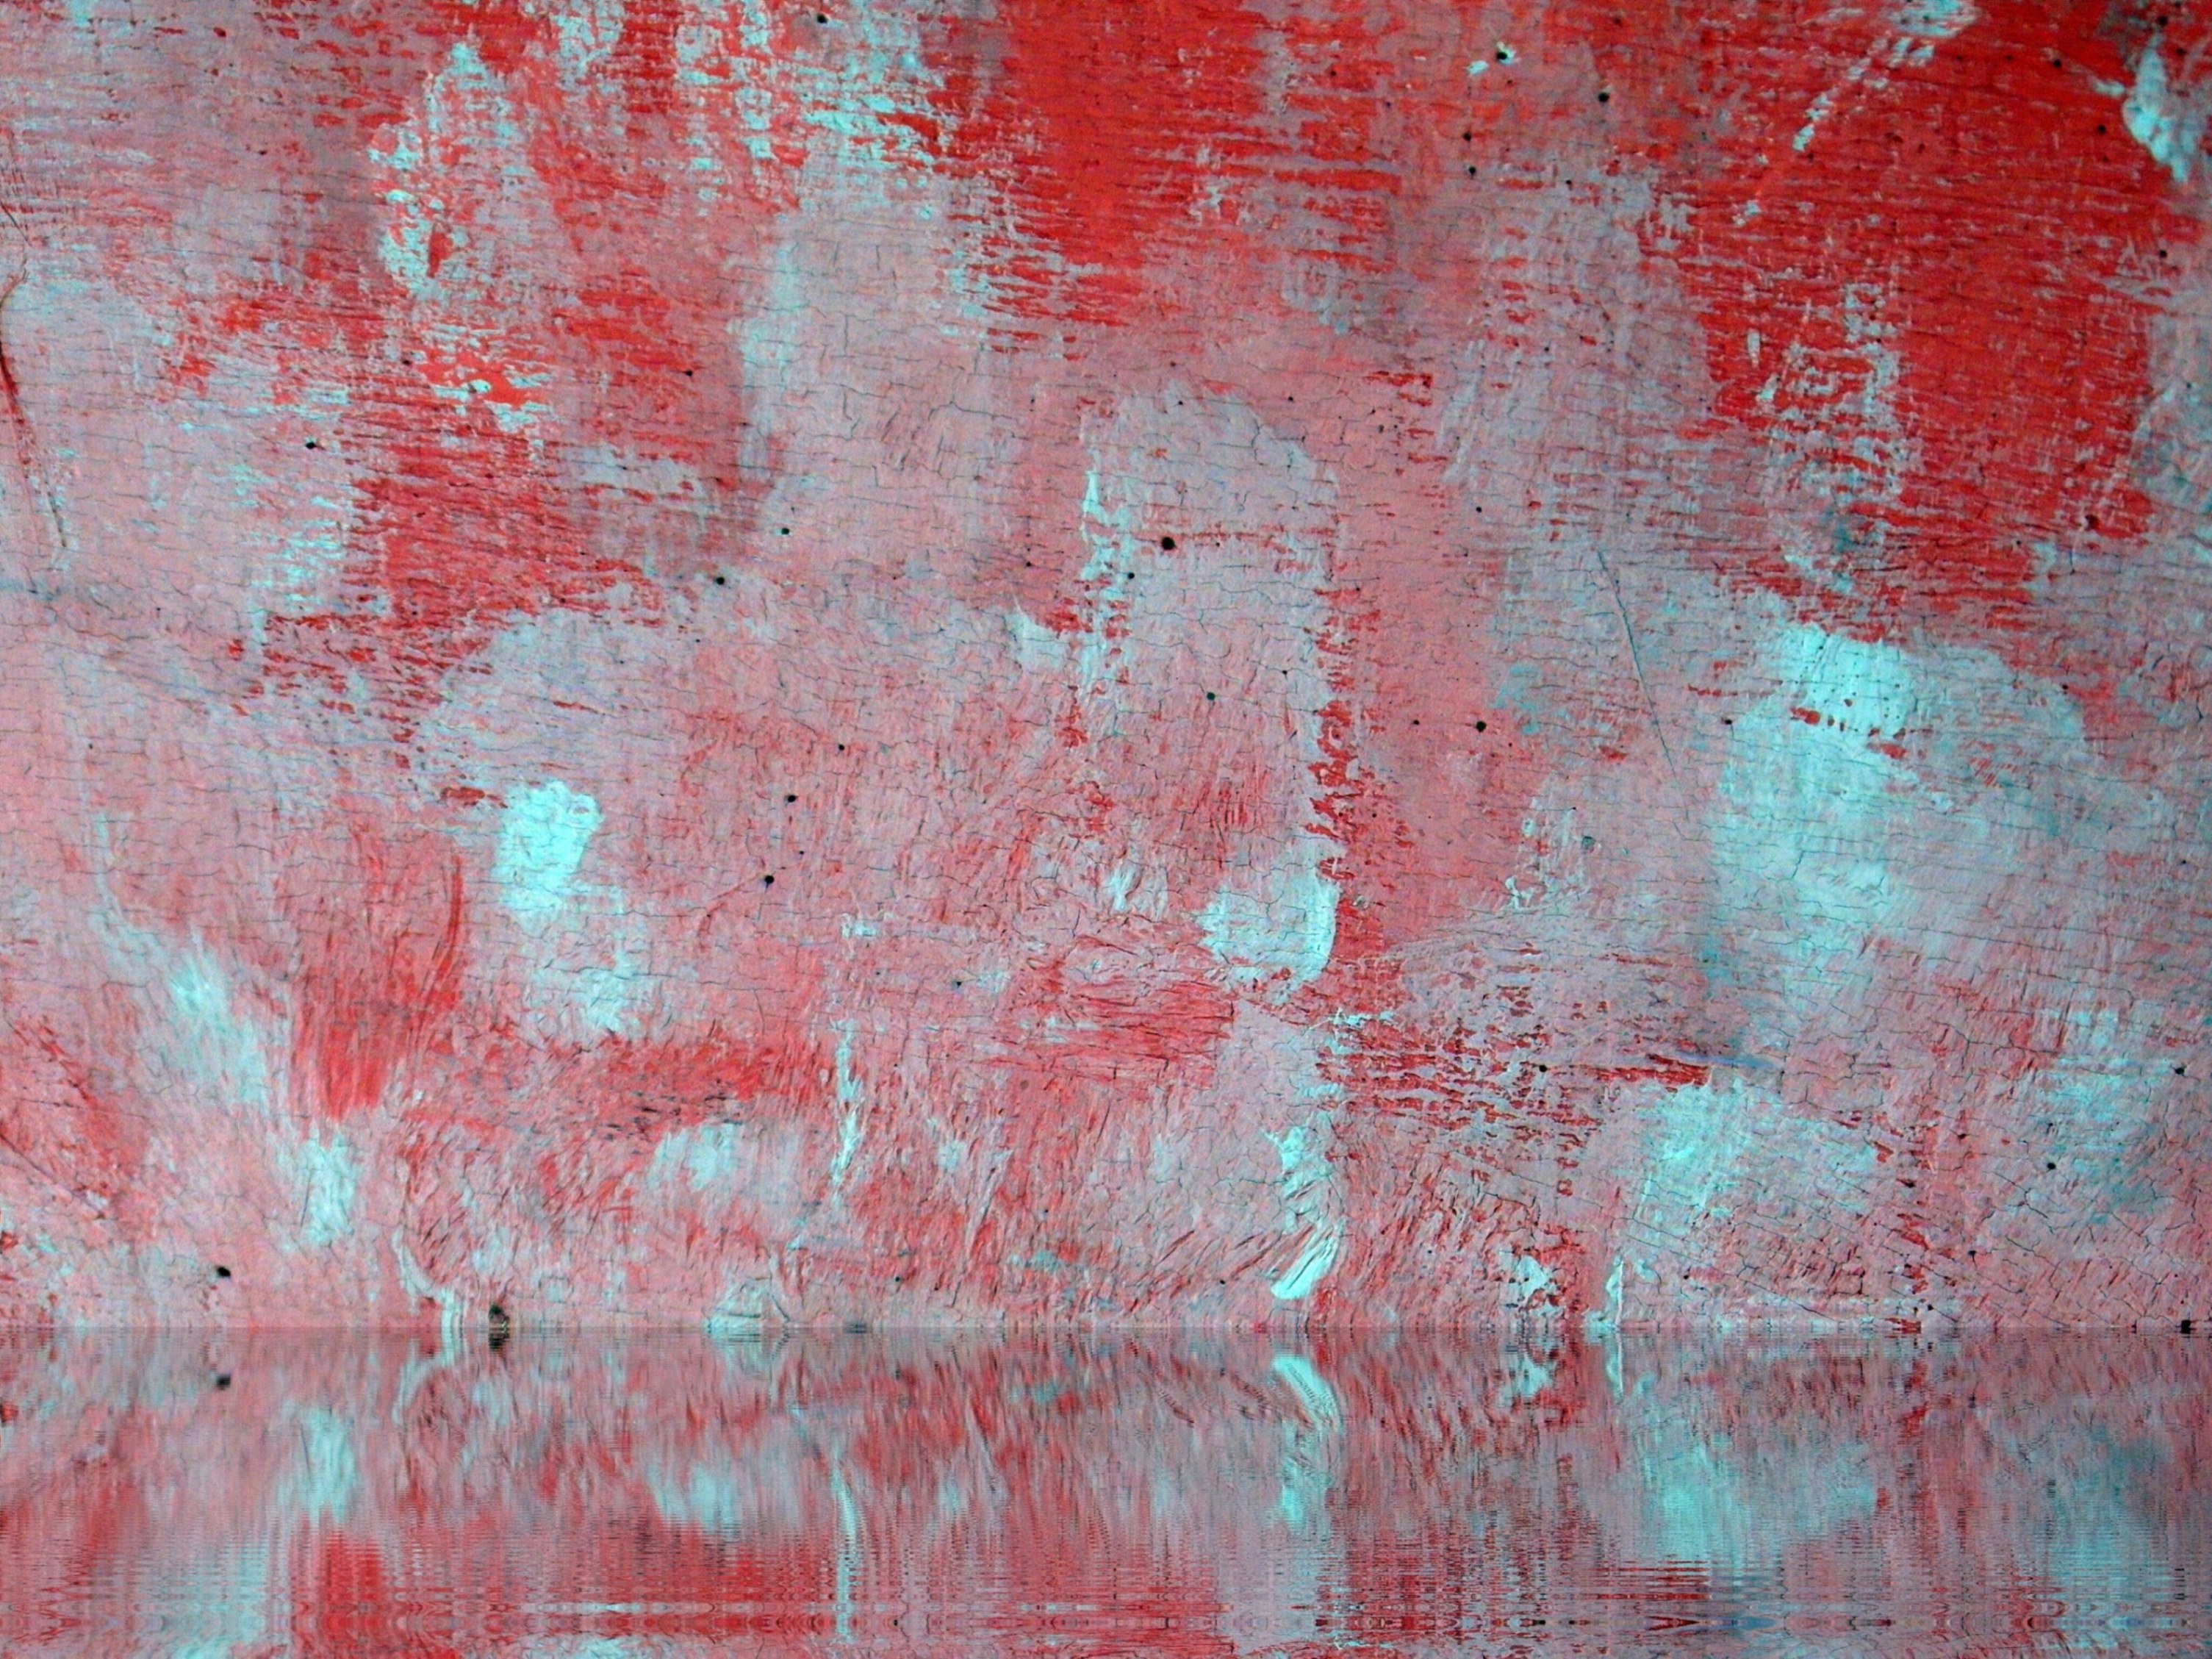 Painted wall water reflection photo